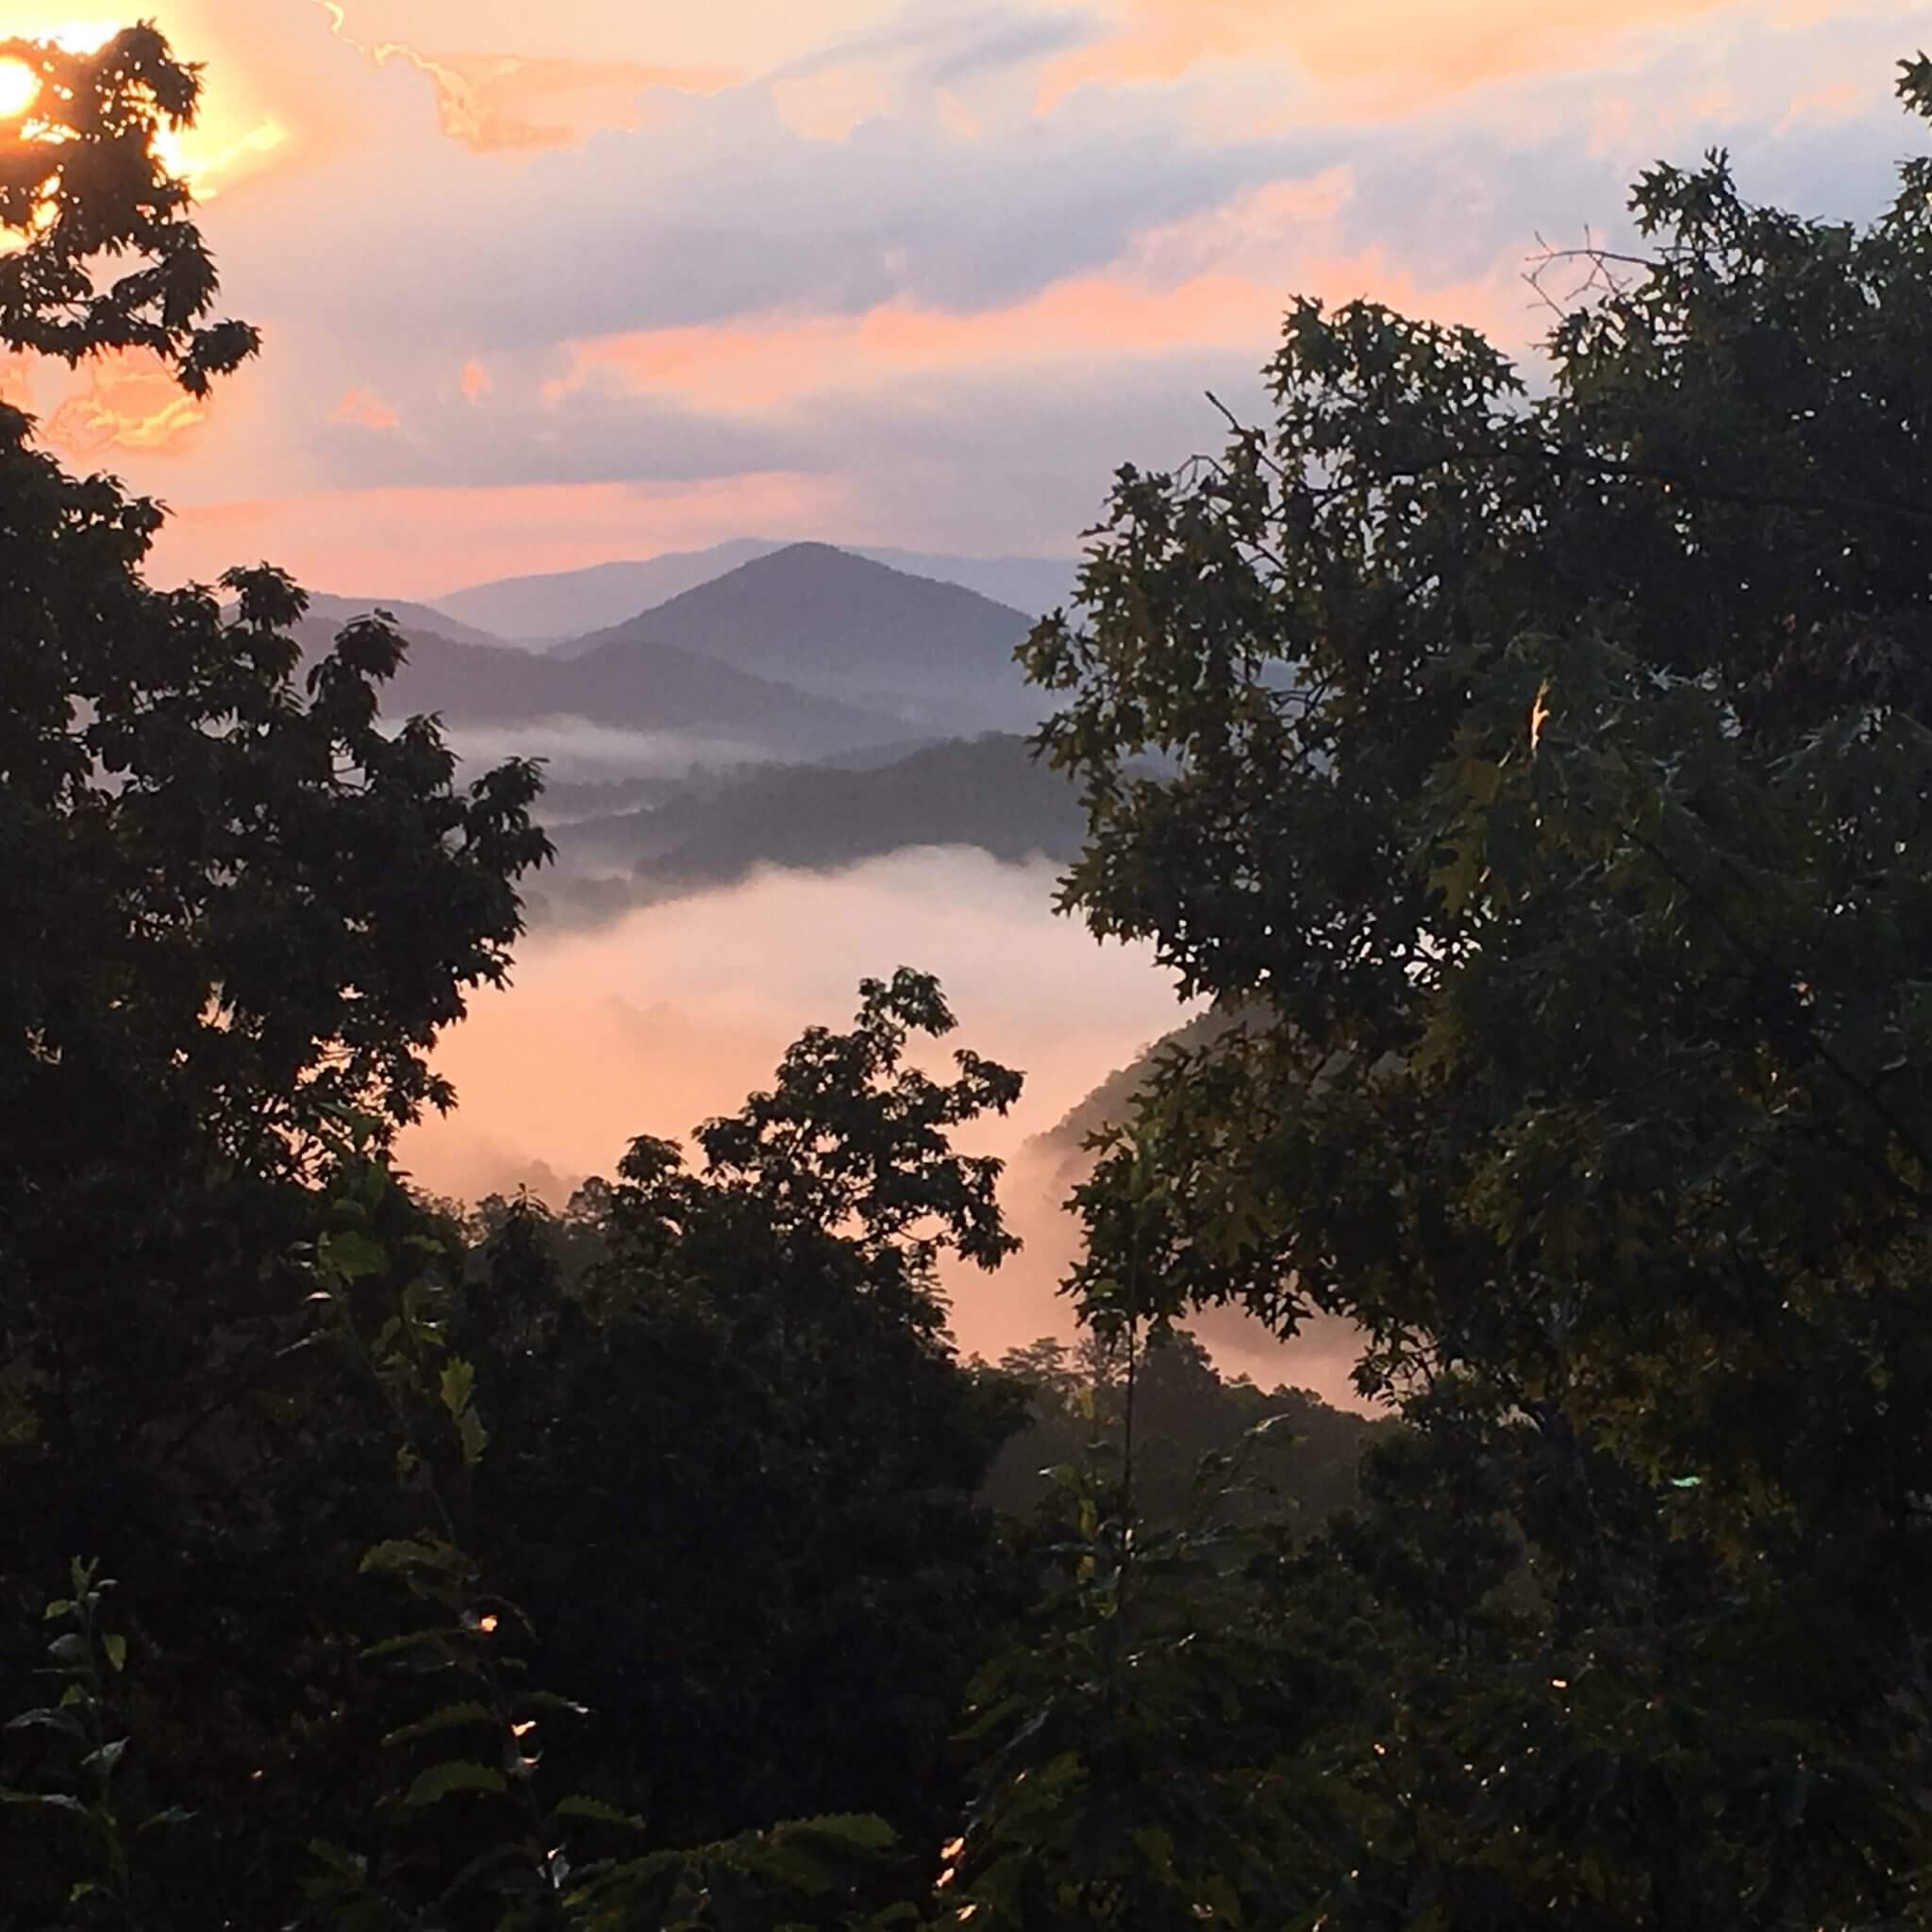 View from vacation rental in the Great Smokey Mountains, Tn.